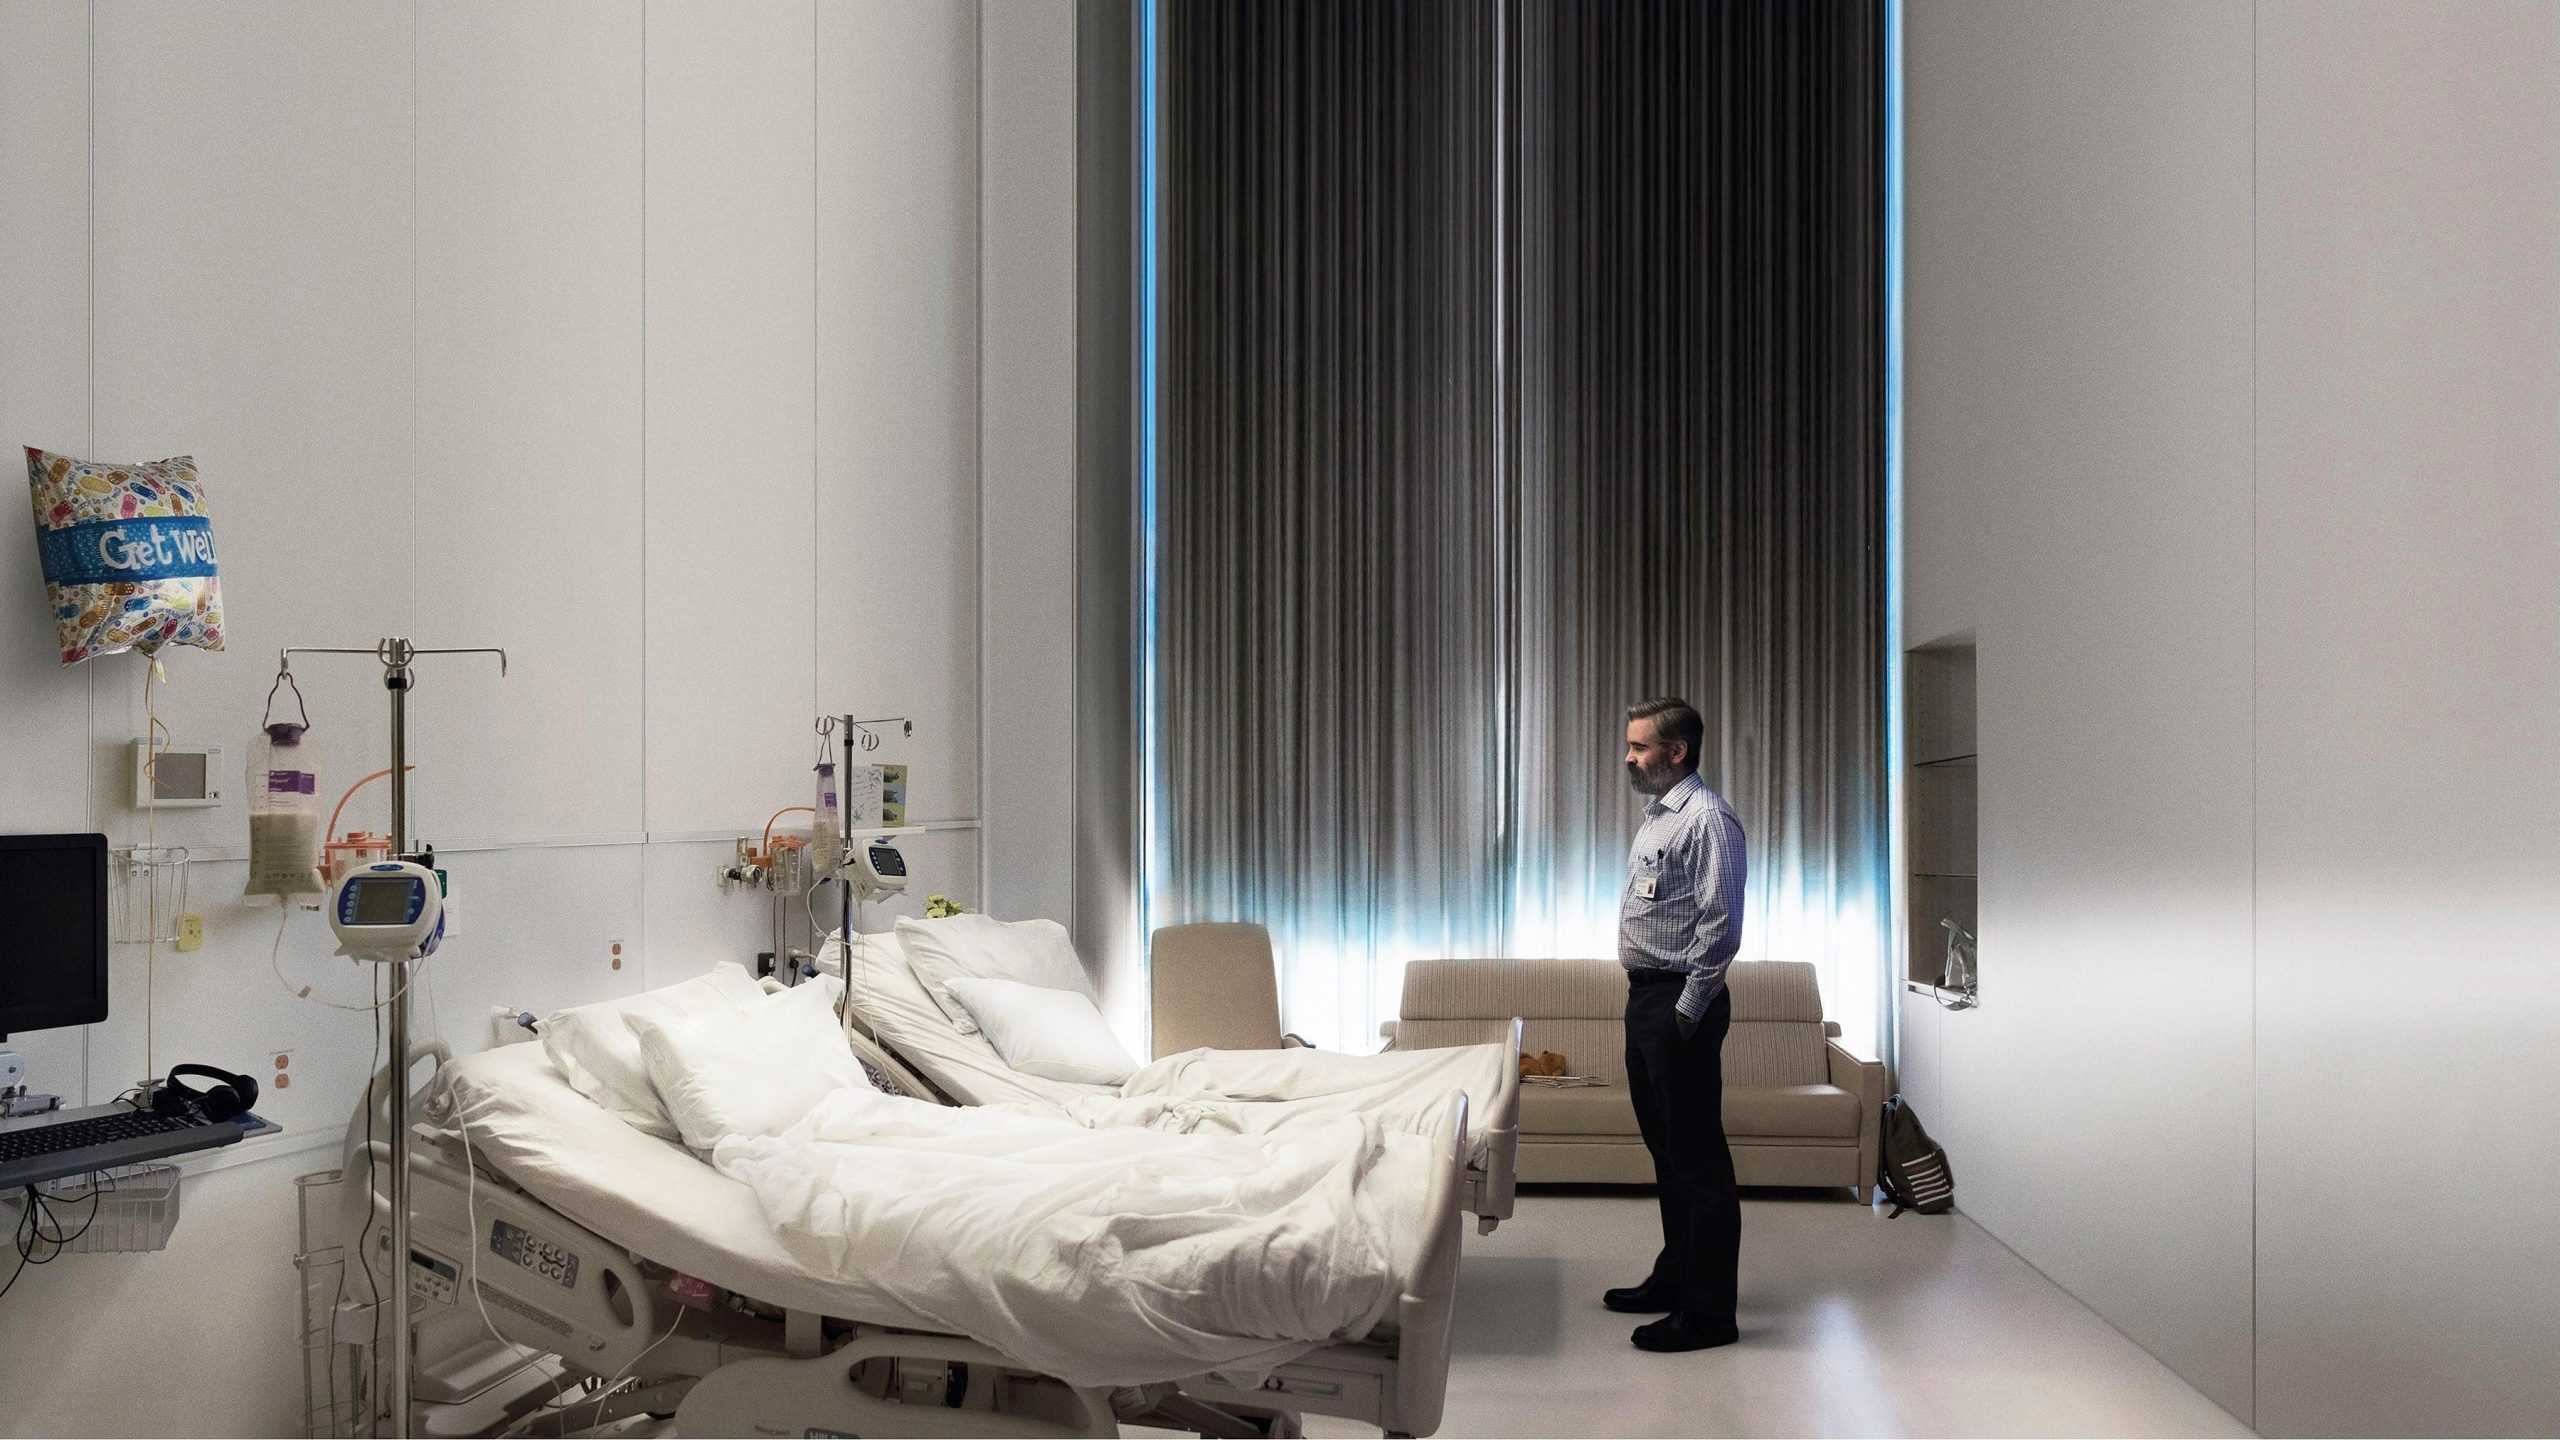 Film Review: The Killing of a Sacred Deer